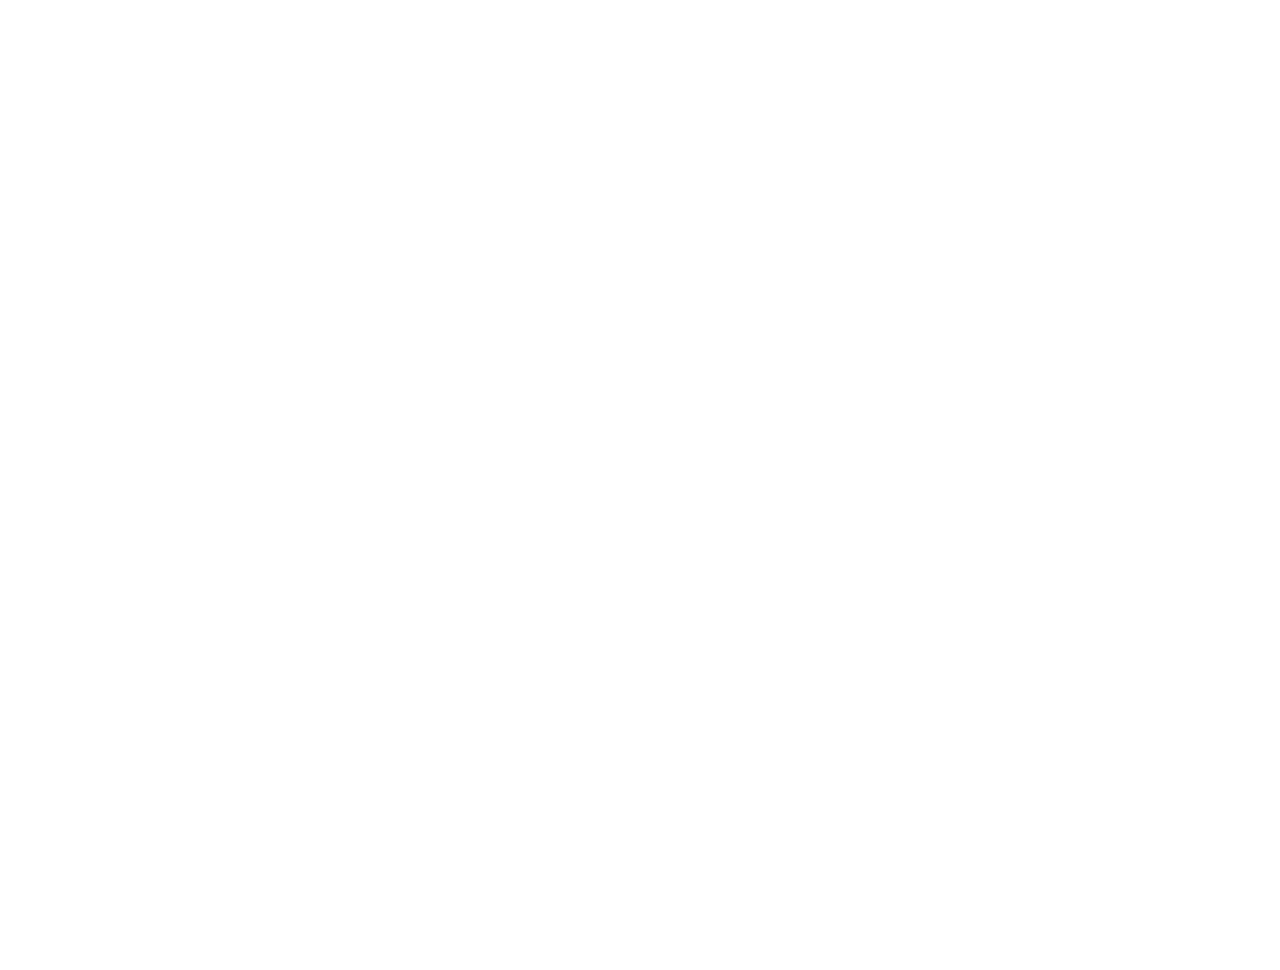 Year of the 50th